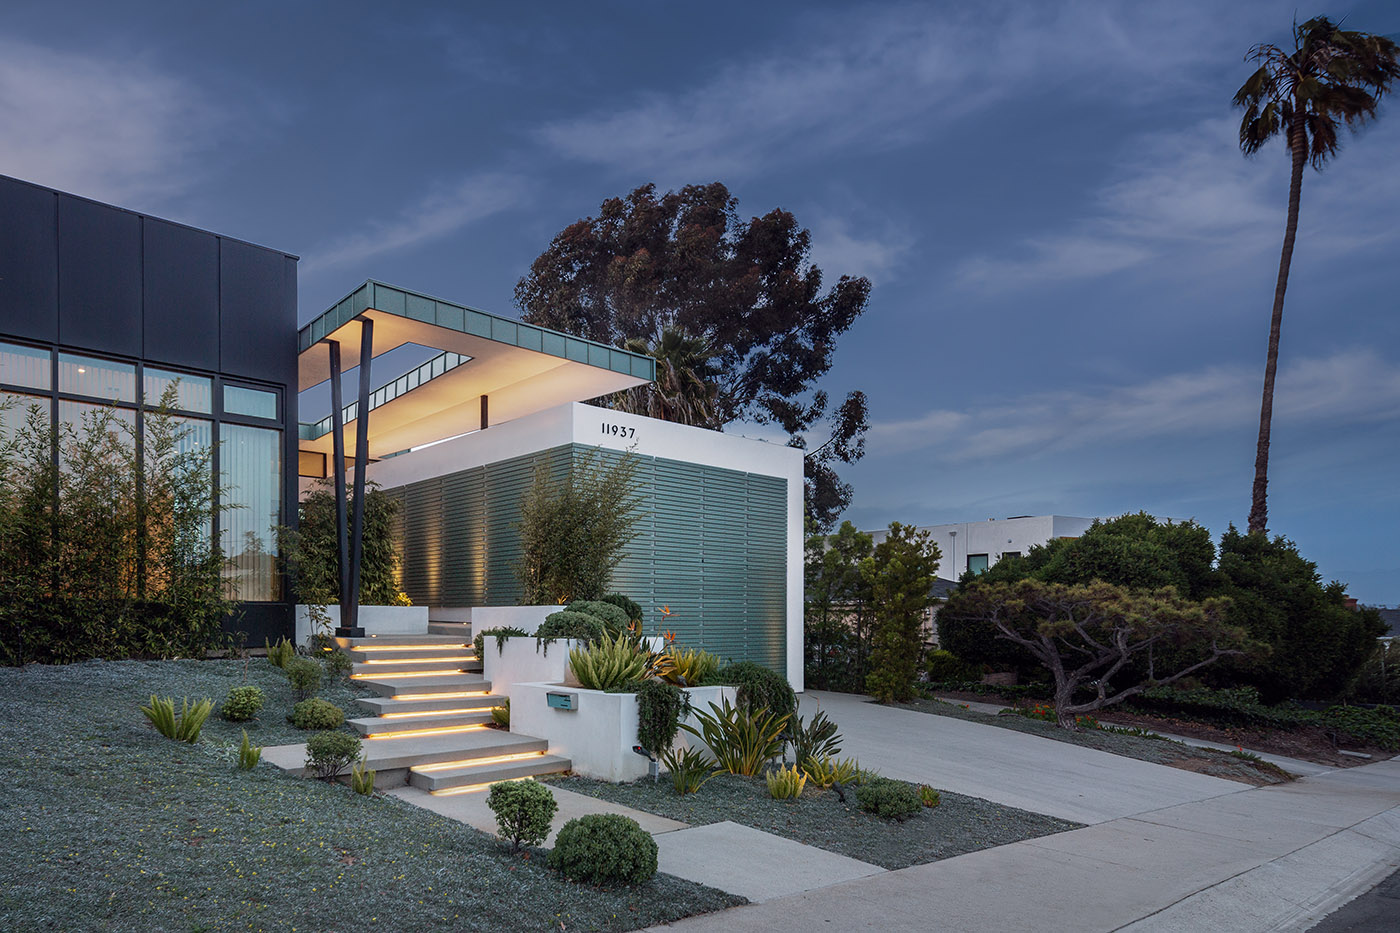 In California, at Mar Vista Residence, the rational approach of mid-century modernism blends with warm finishes and contemporary architectural ideas